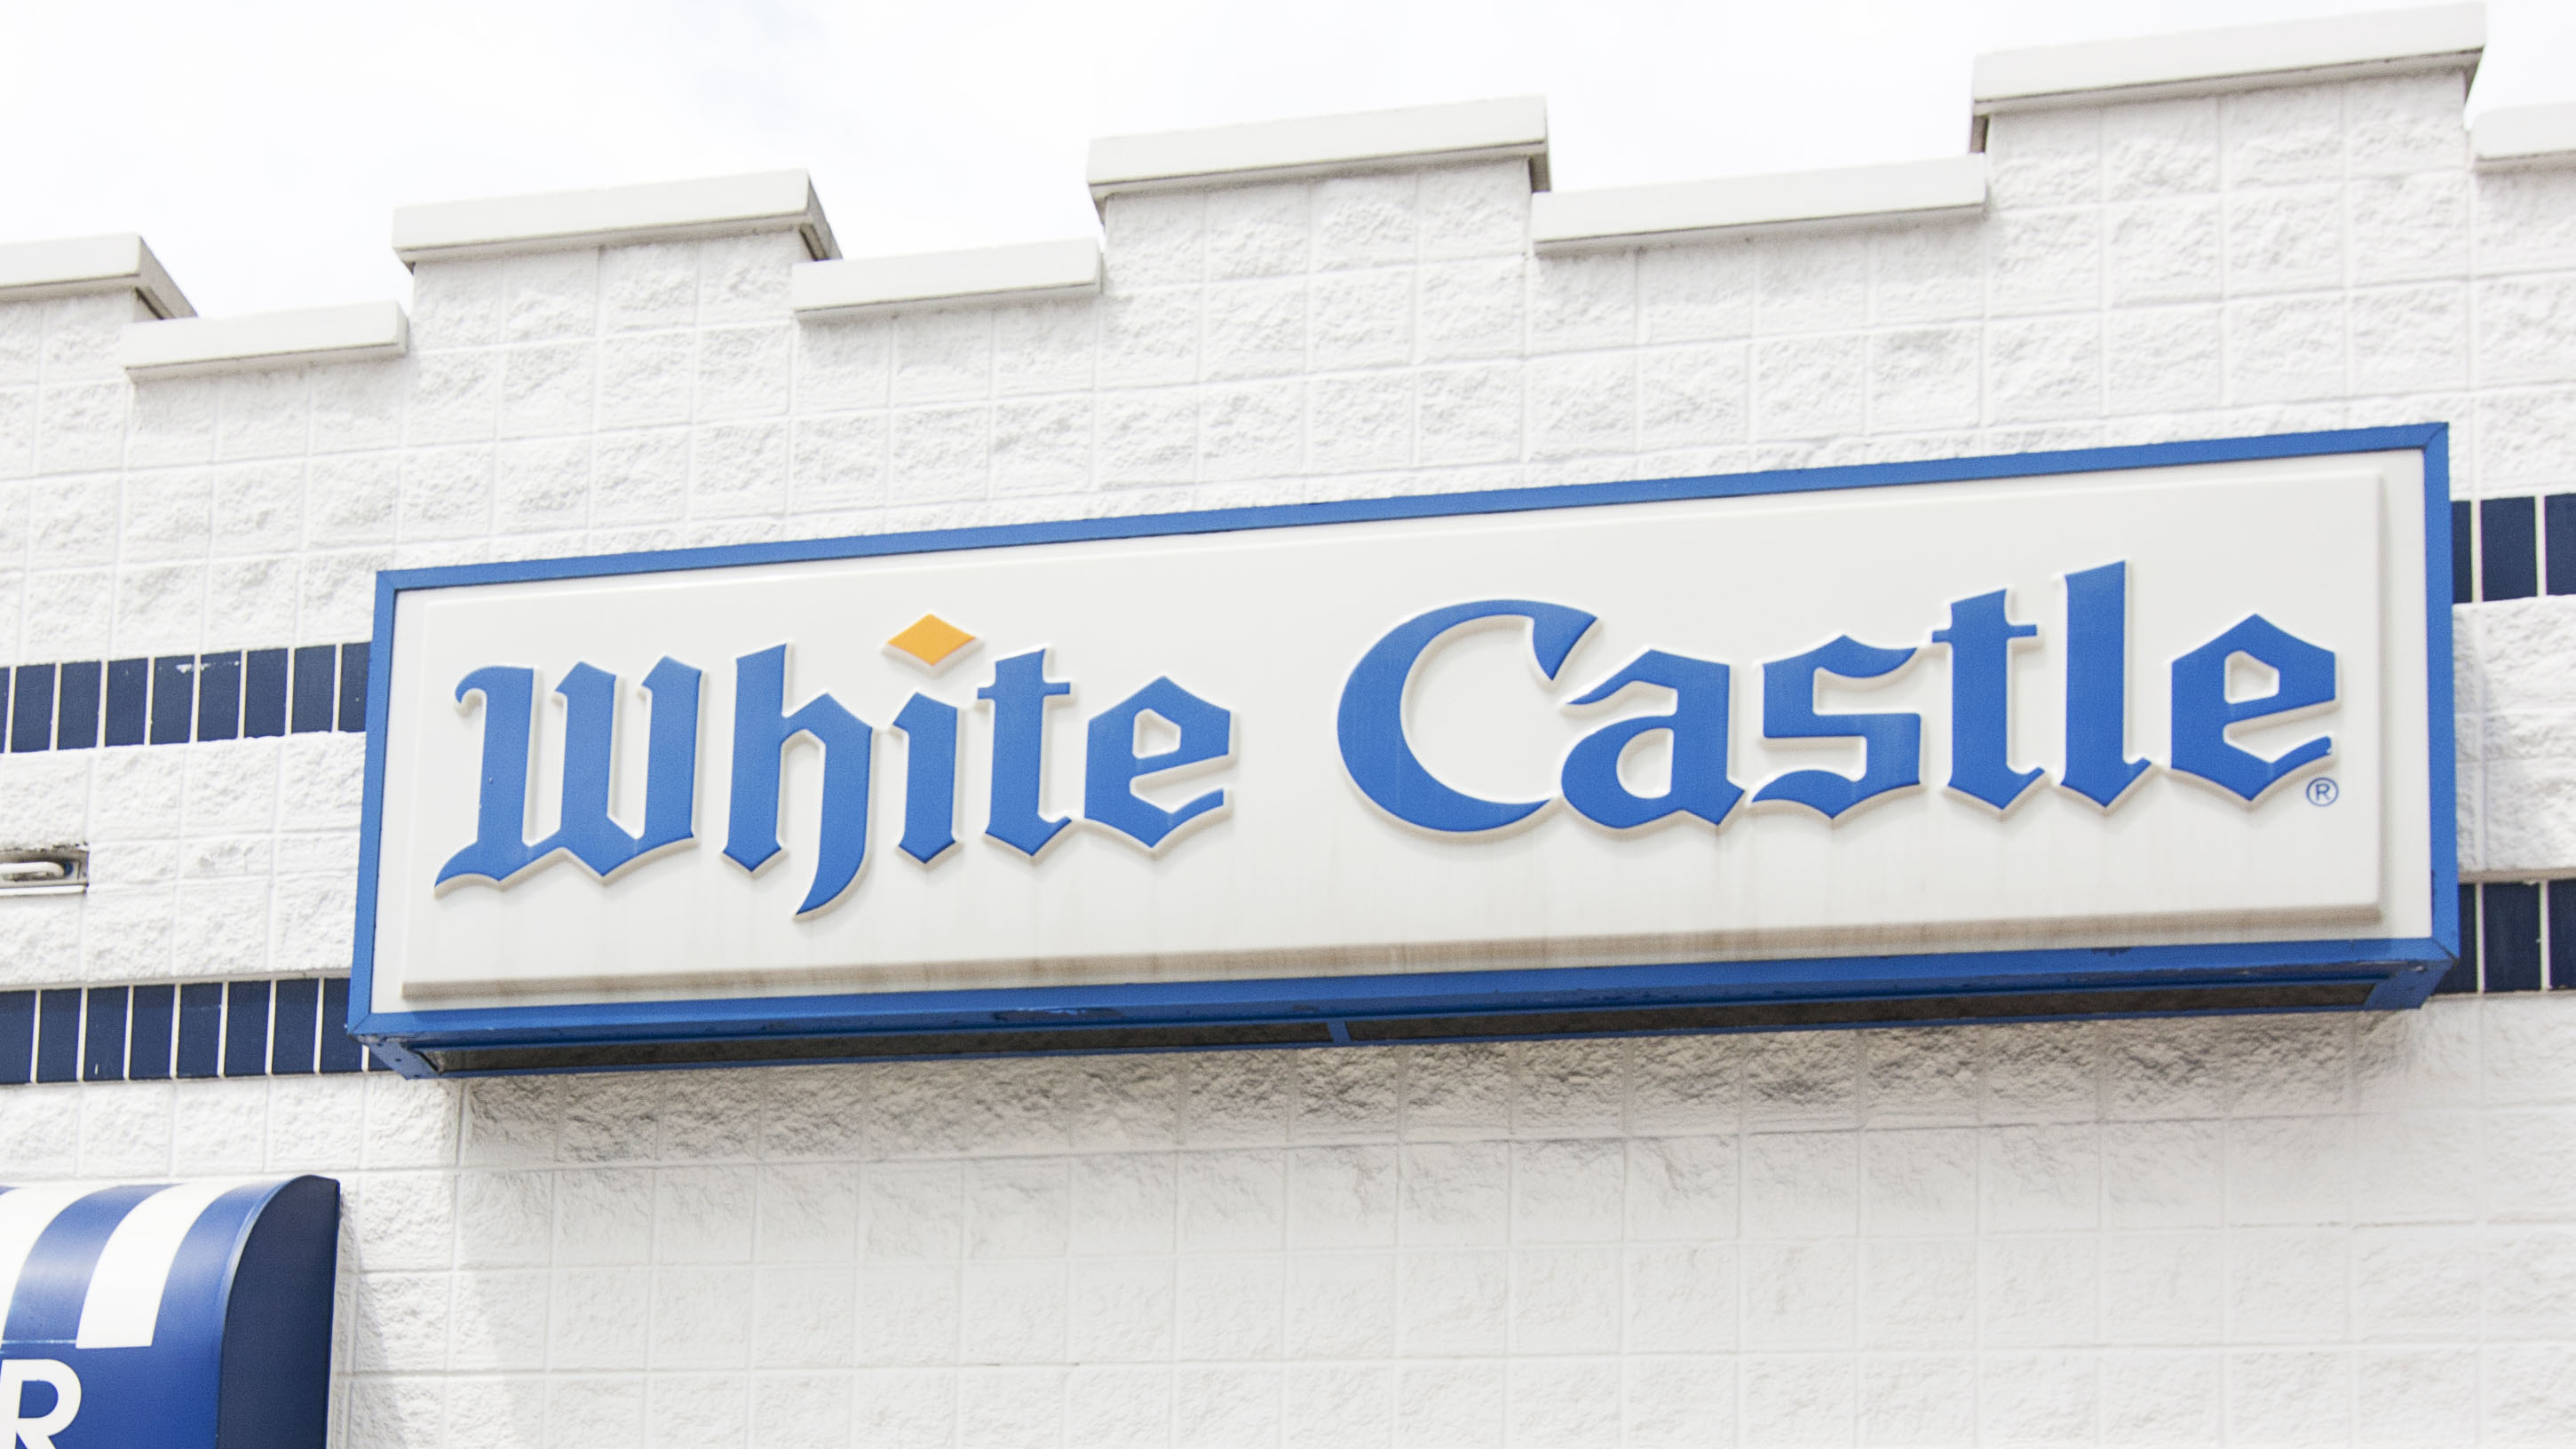 White Castle CEO Lisa Ingram on economic trends in the food industry and celebrating her company’s 100th anniversary.